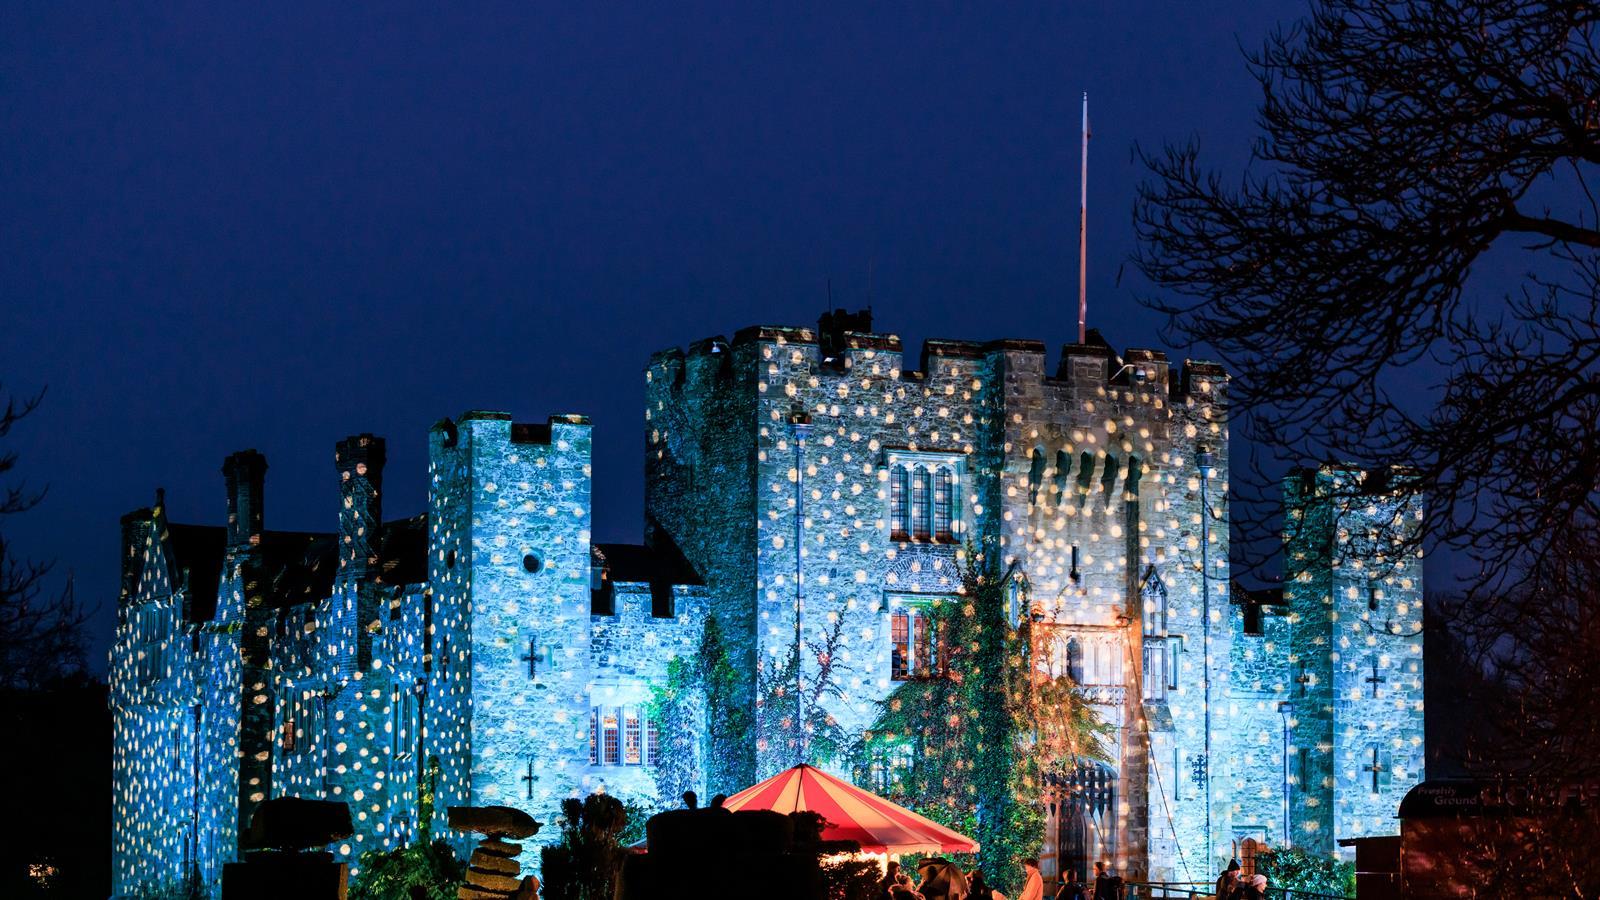 Hever Castle at Christmas